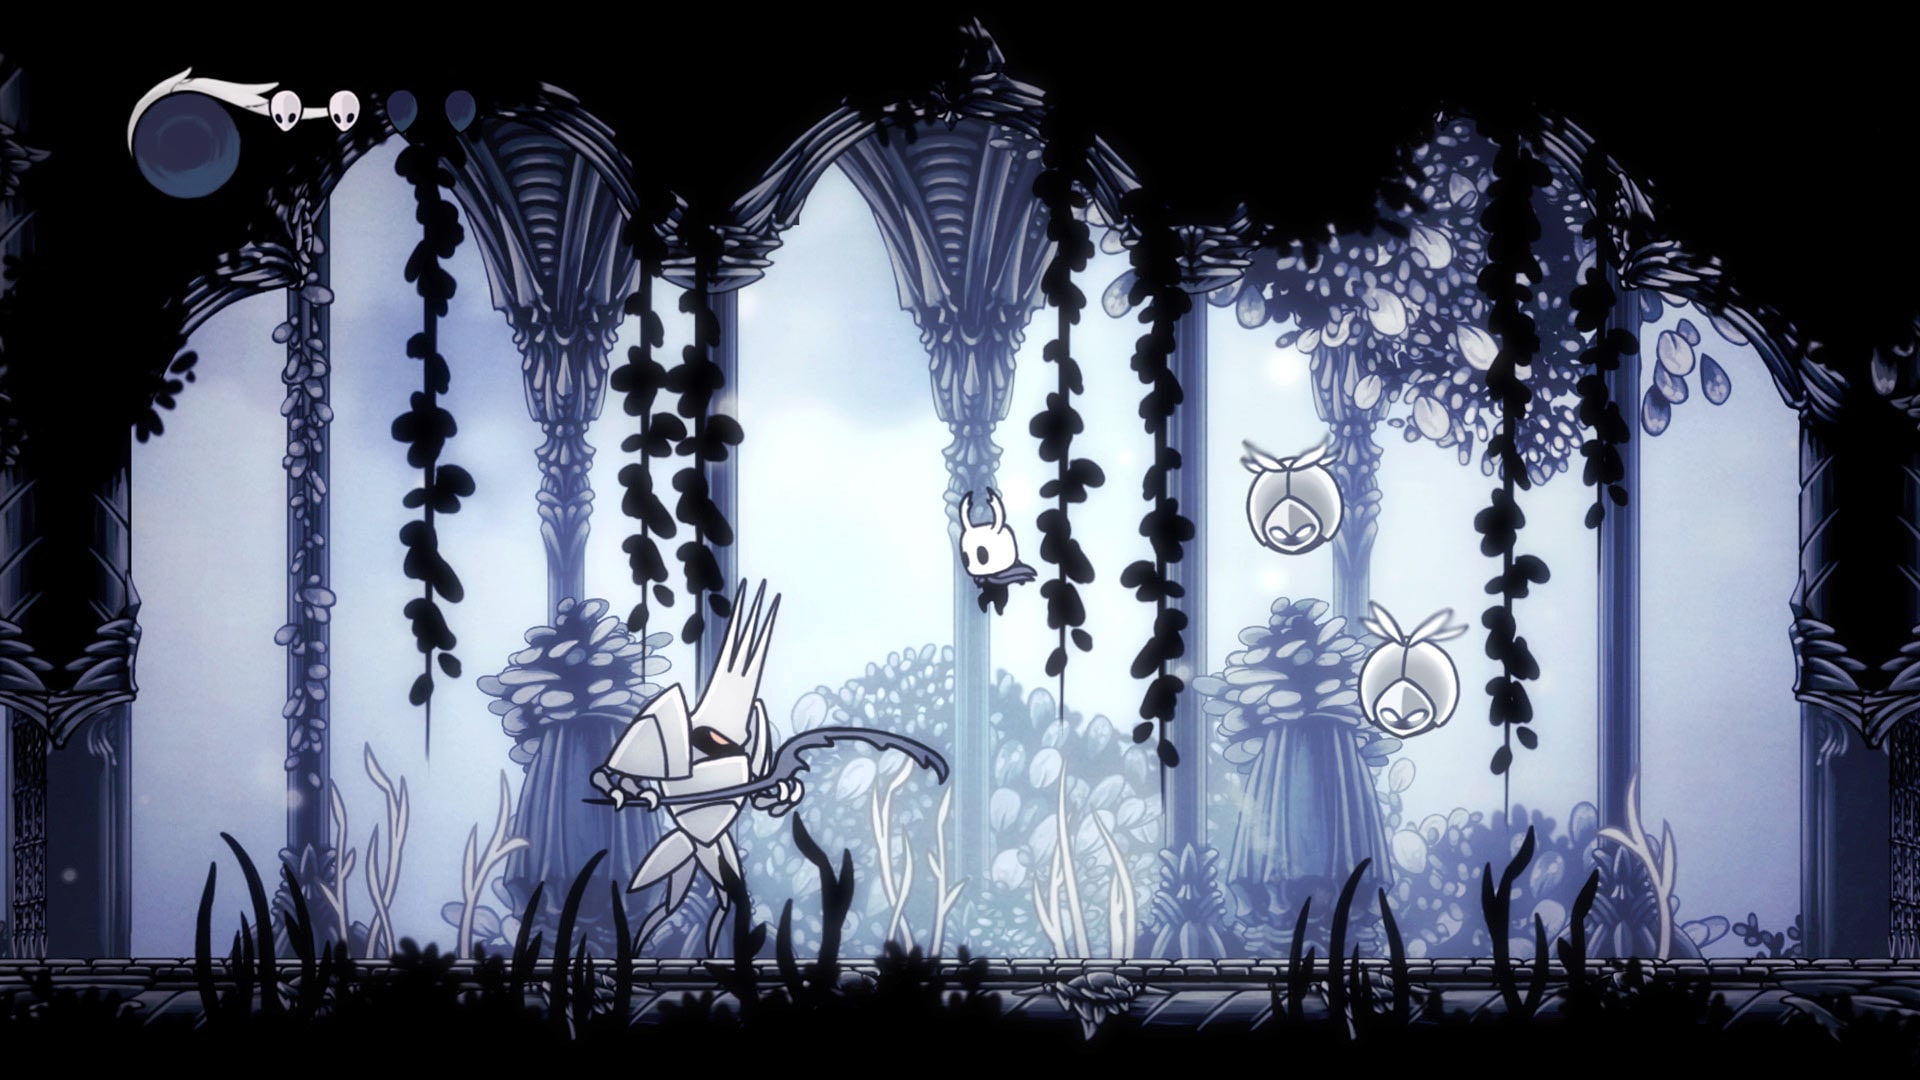 Hollow Knight - Voidheart Edition Trophy Guide and PSN Price History